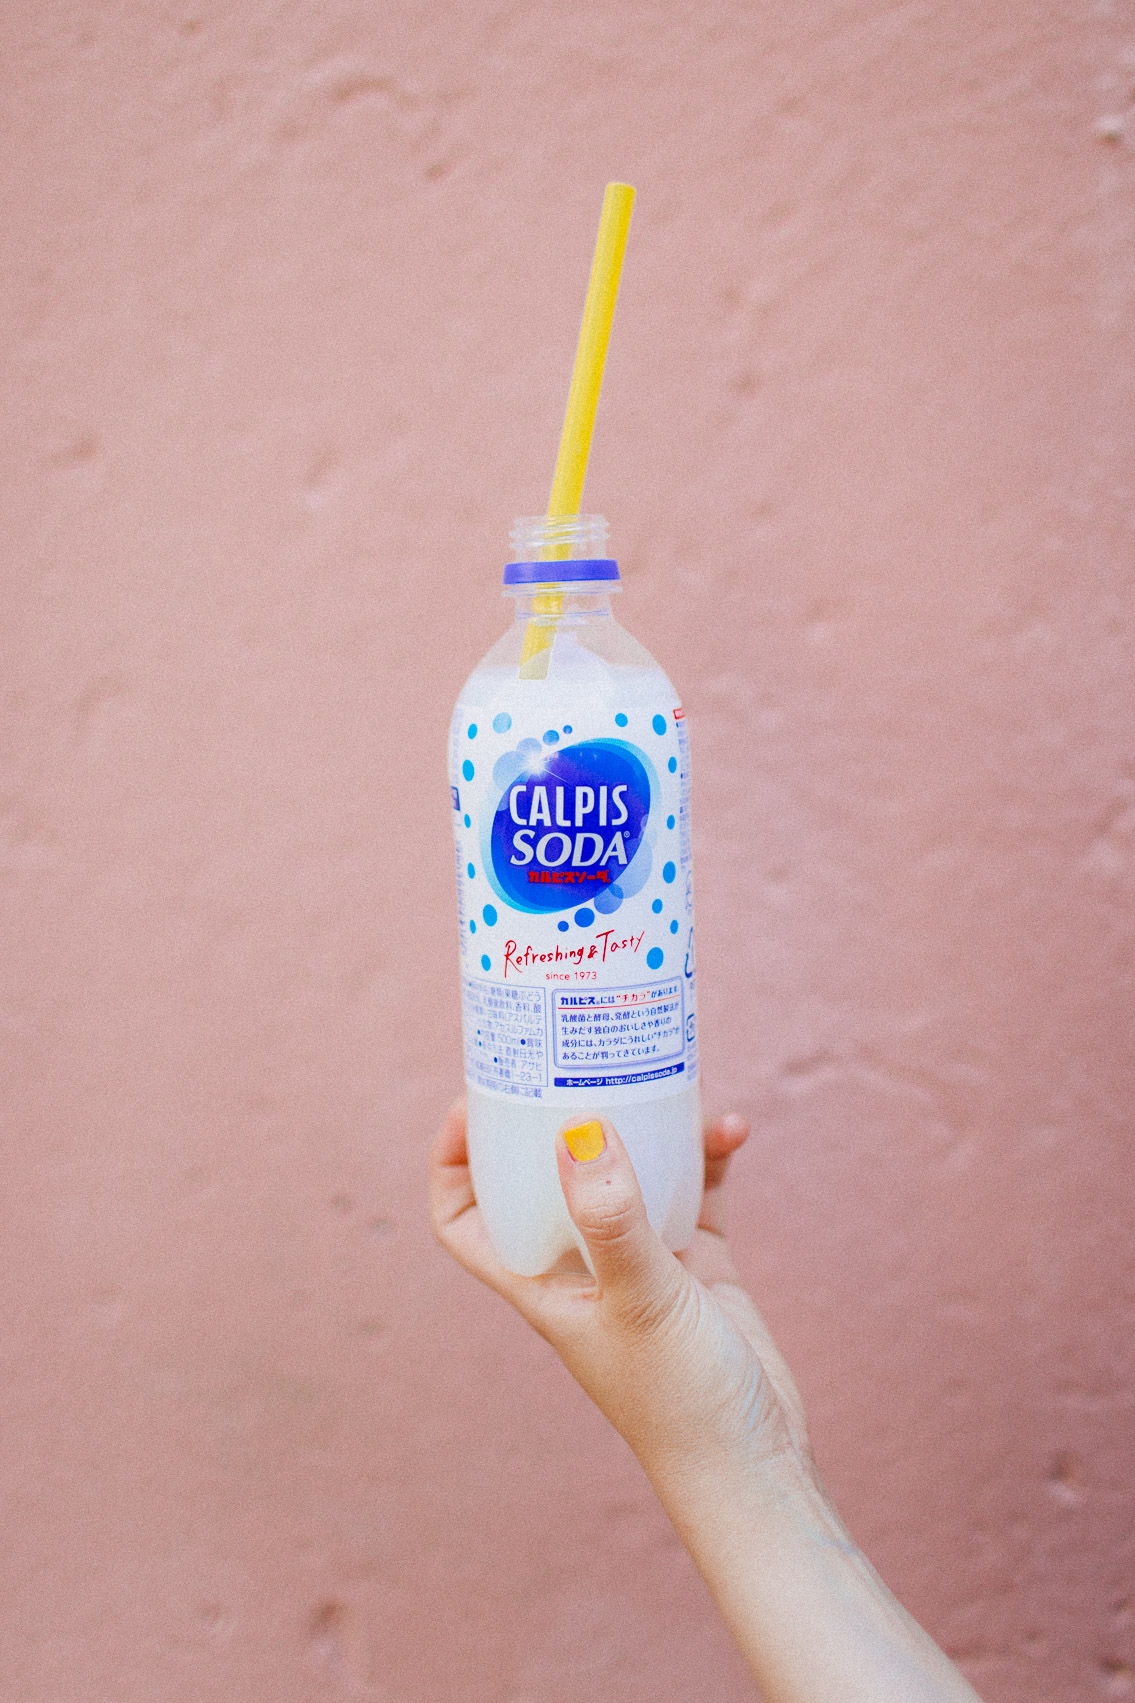 Calpis soda - The cat, you and us